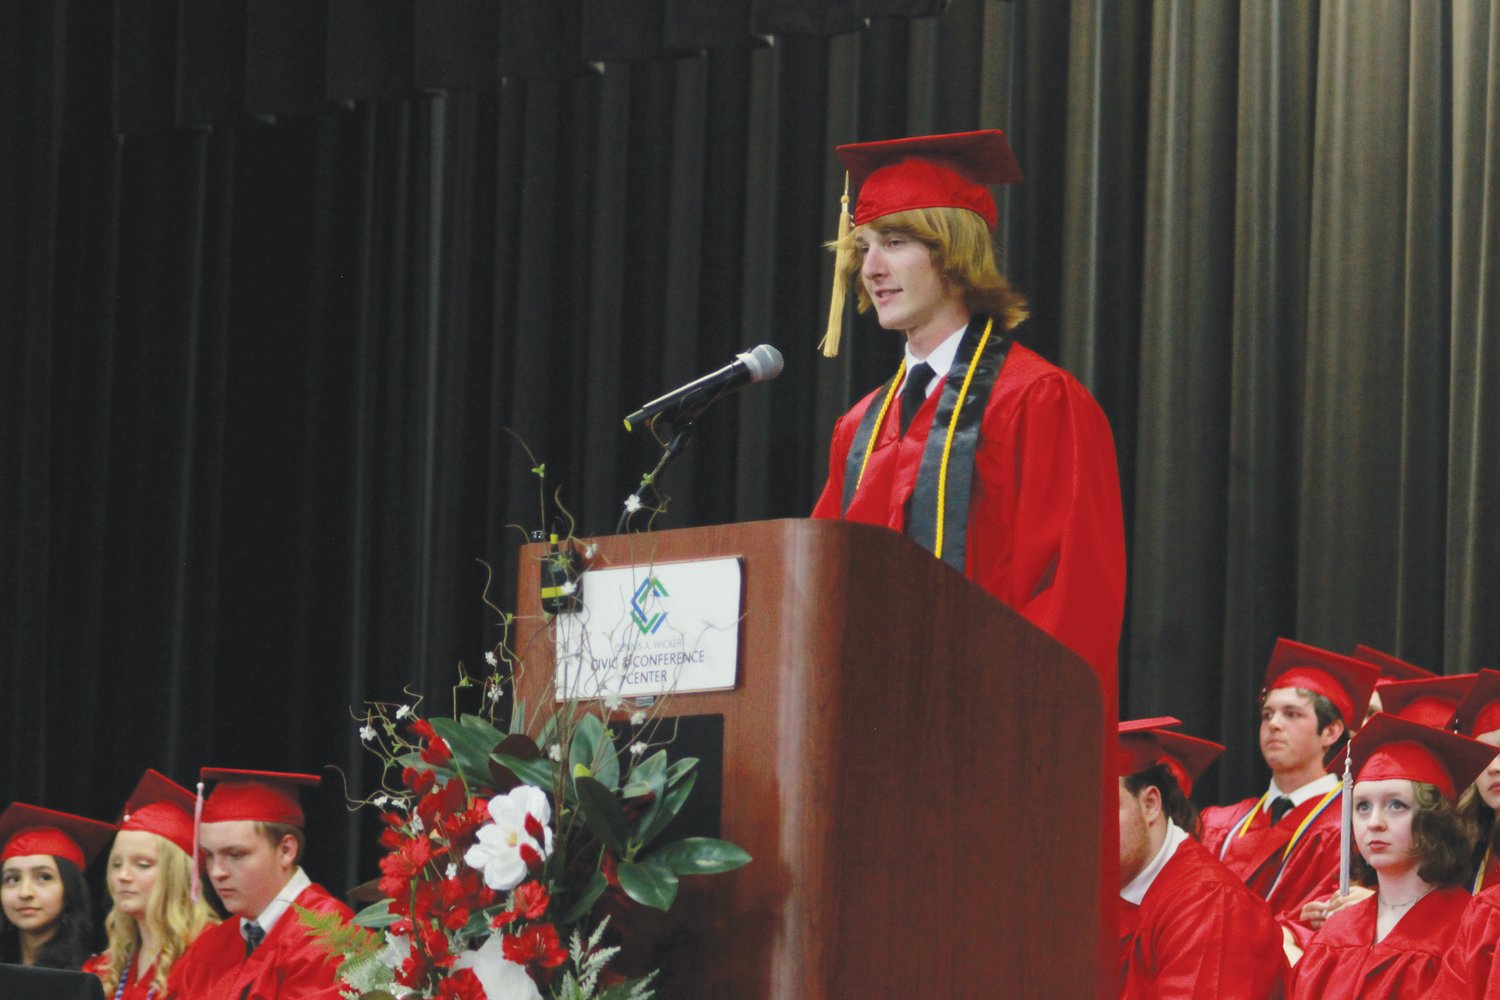 Chatham Central High School Senior Nicholas Jourdan gives heis senior address, titled ‘Challenge’, to his graduating class on Friday at the Dennis A. Wicker Civic Center in Sanford.